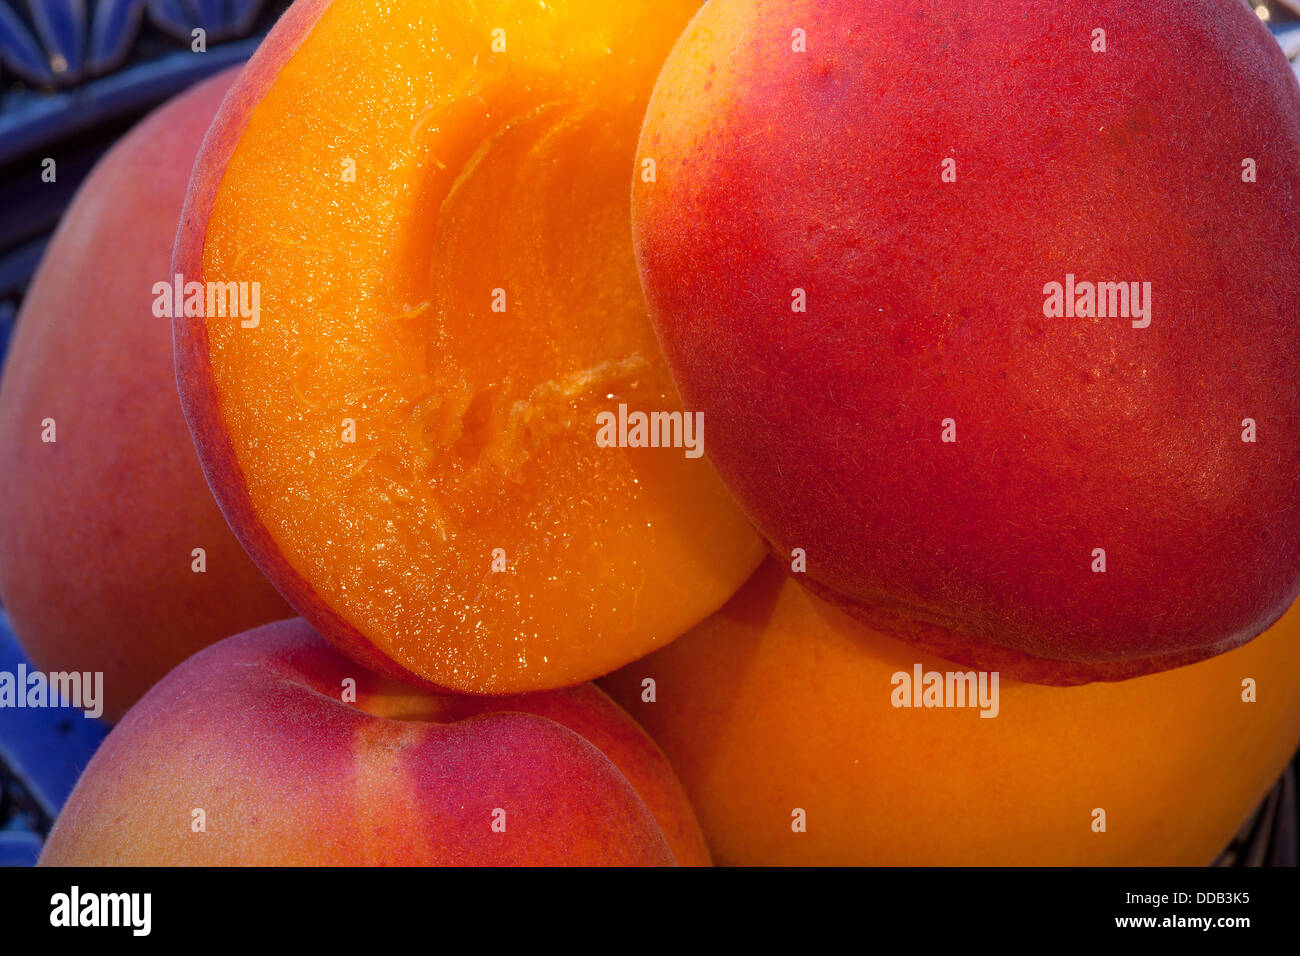 ripe apricot halves in a blue bowl Stock Photo